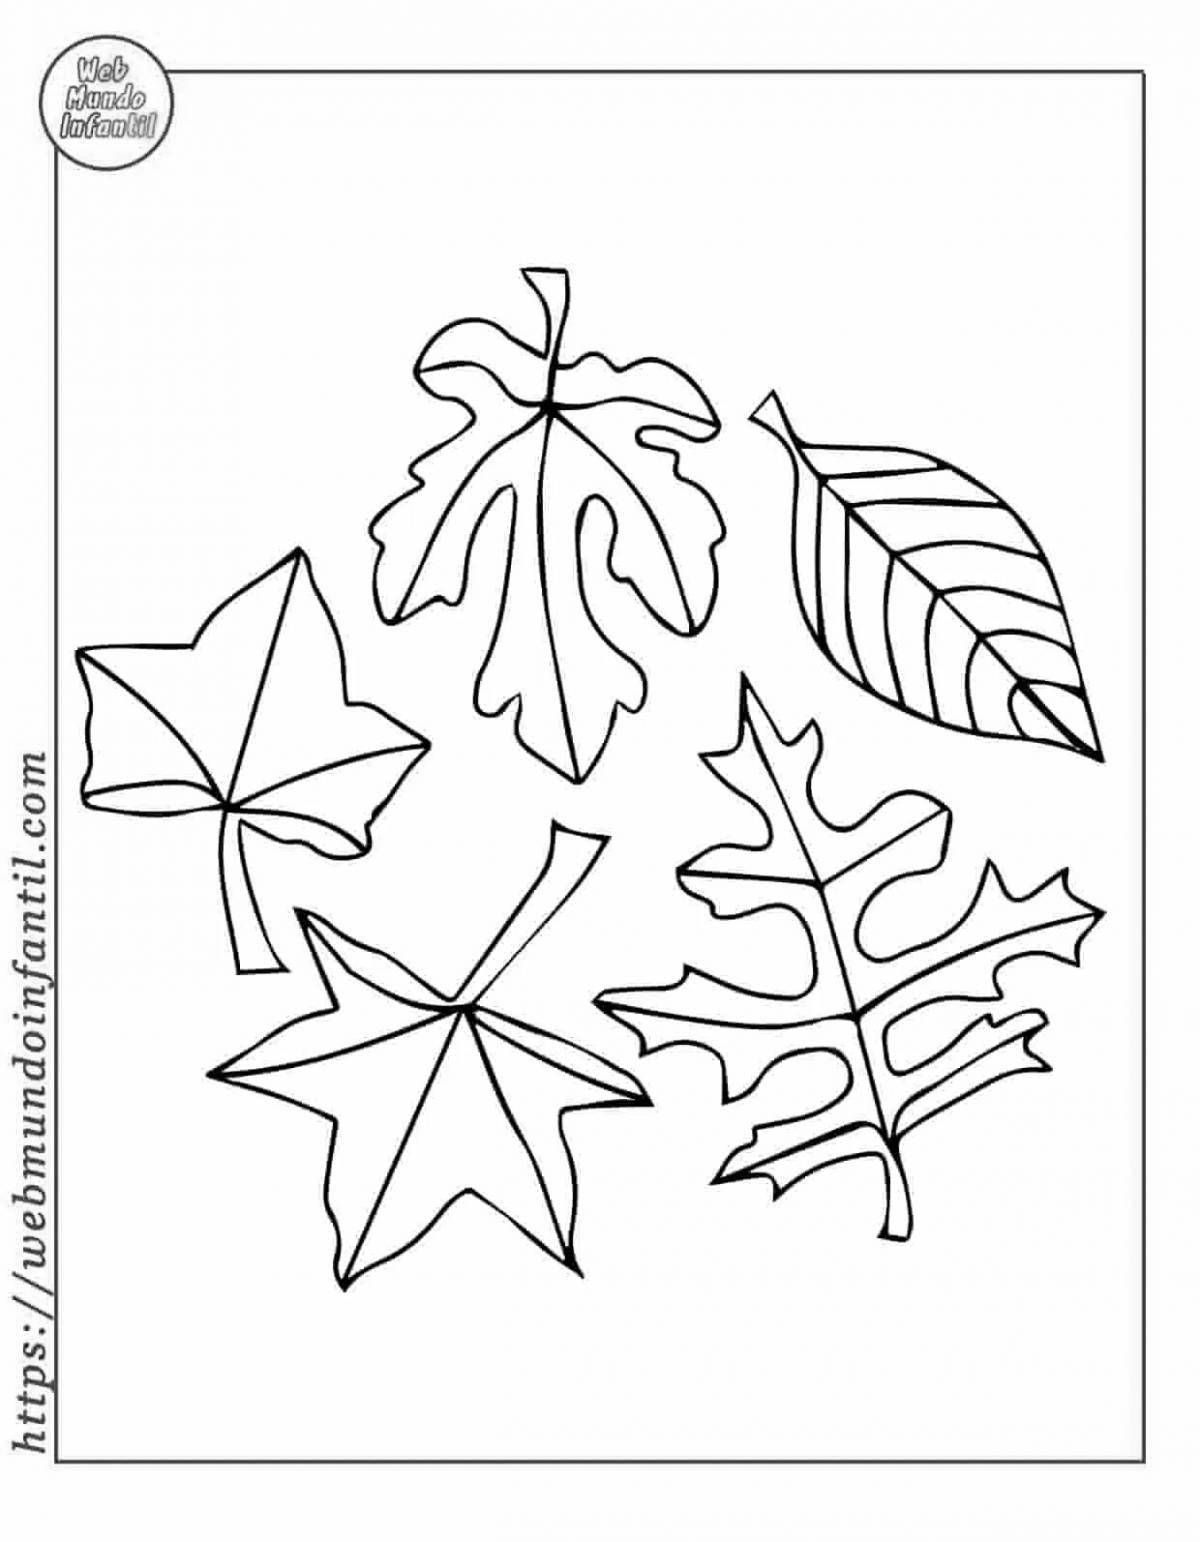 Glorious leaves coloring book for kids